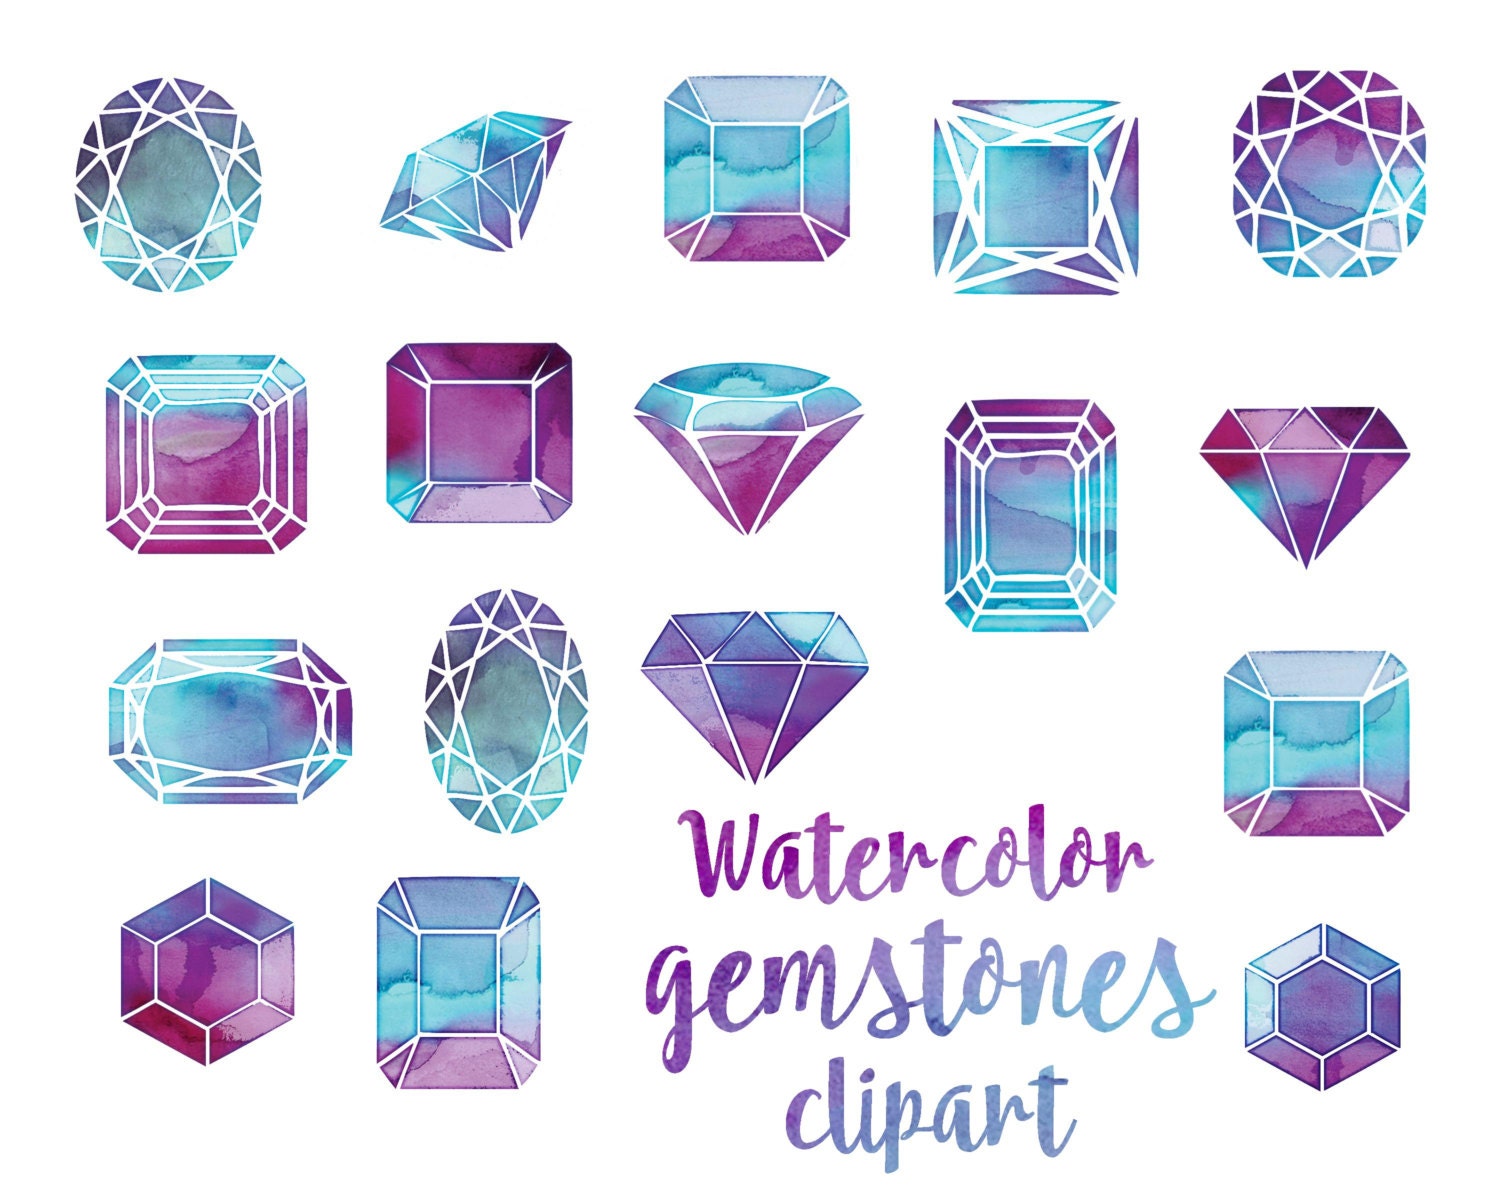 Watercolor gems cut crystals Hand painted gemstones clipart